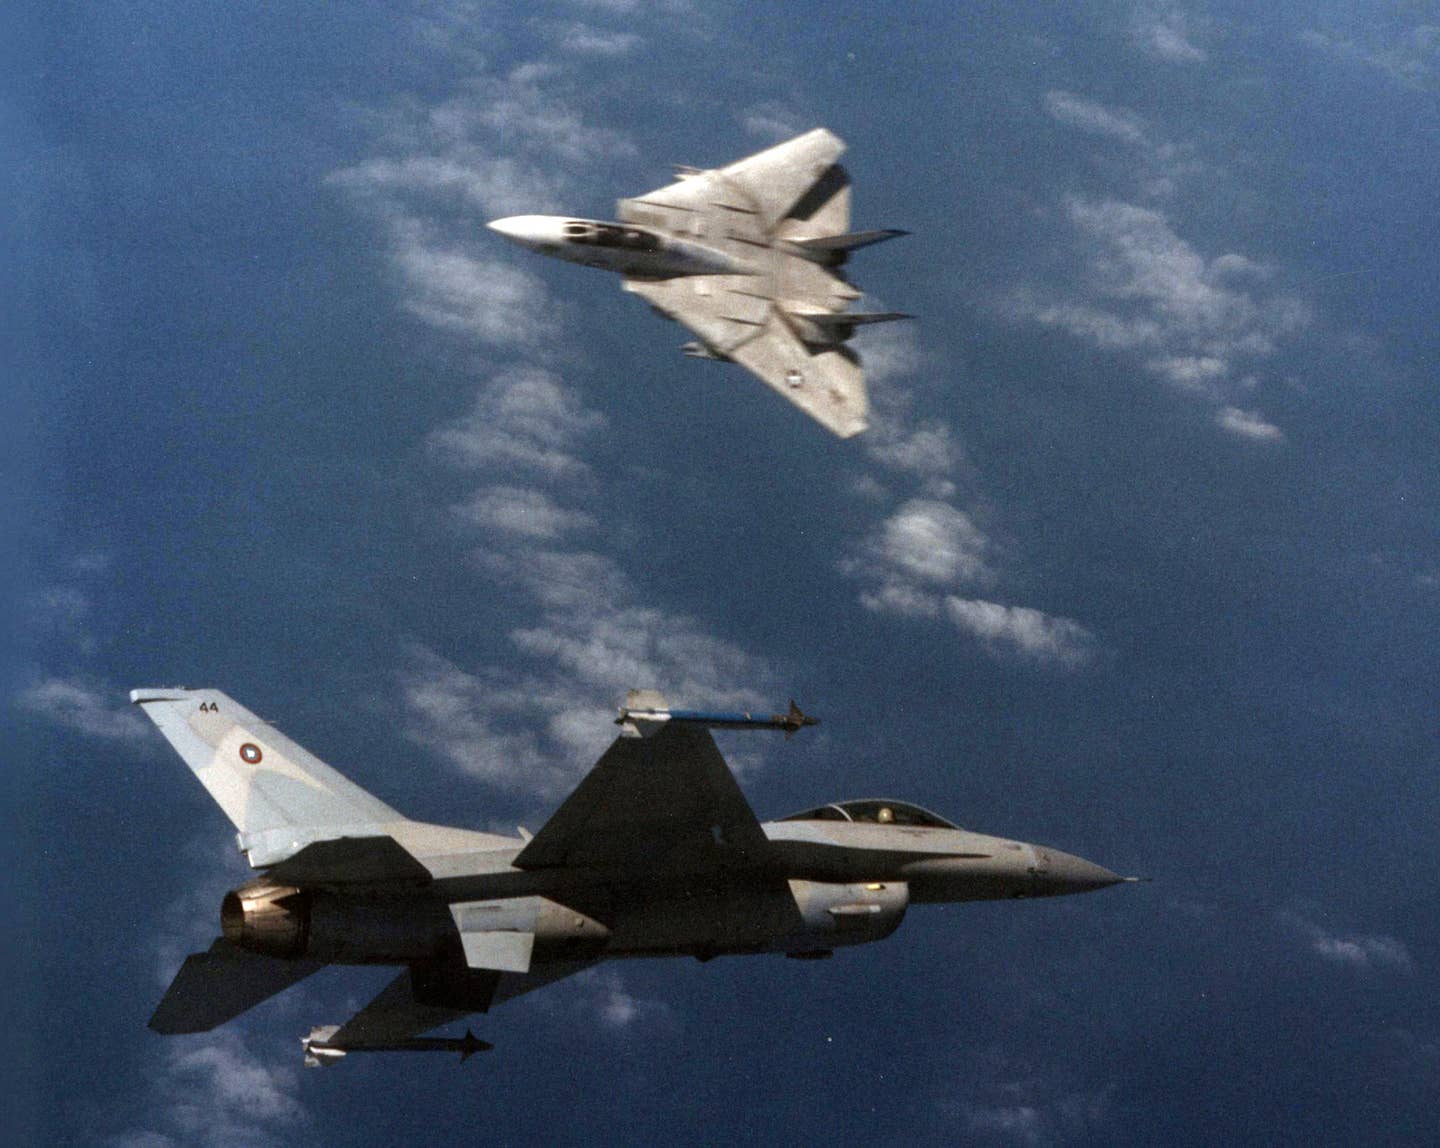 message-editor%2F1622239006477-f-14a_tomcat_of_vf-213_in_dogfight_with_topgun_f-16n_in_march_1989.jpg